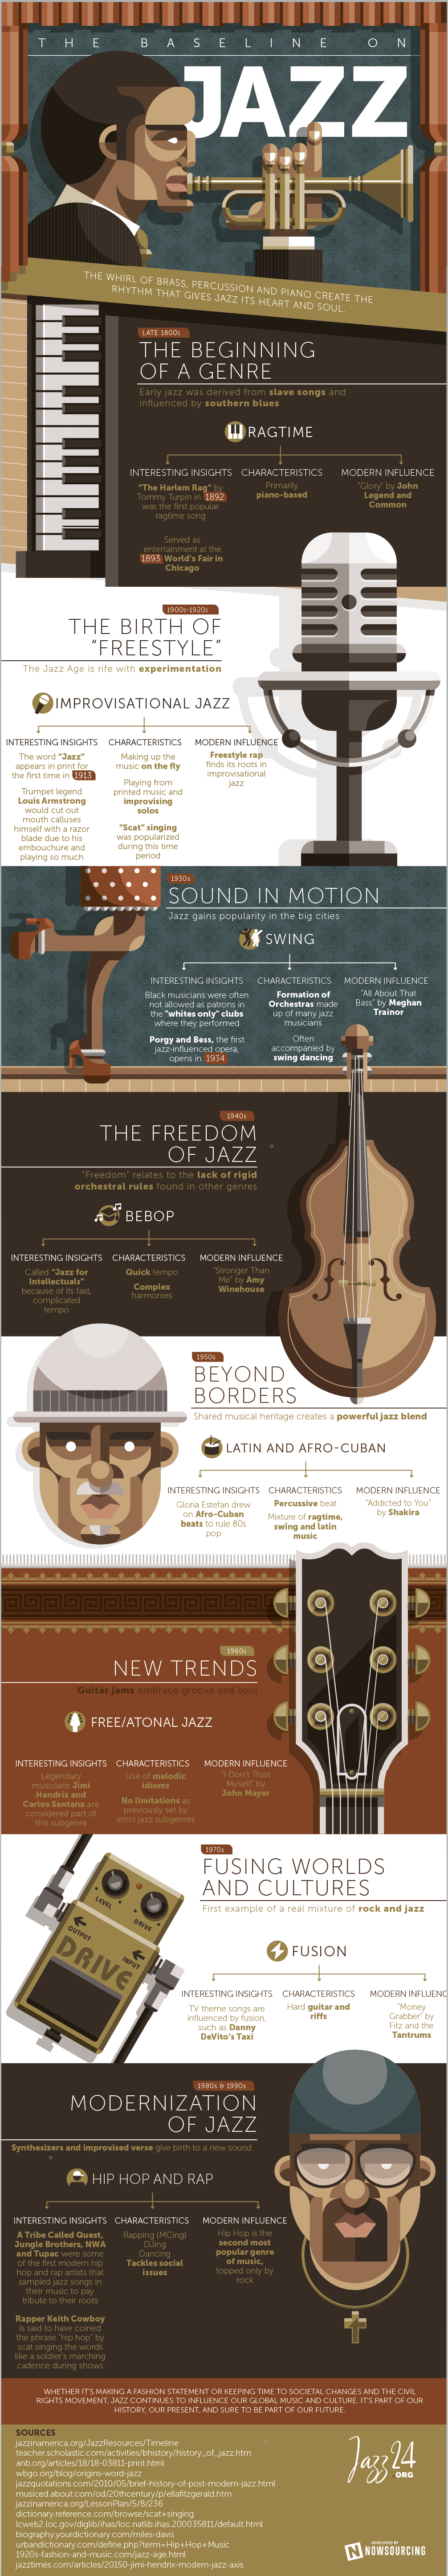 History of Jazz picture pic